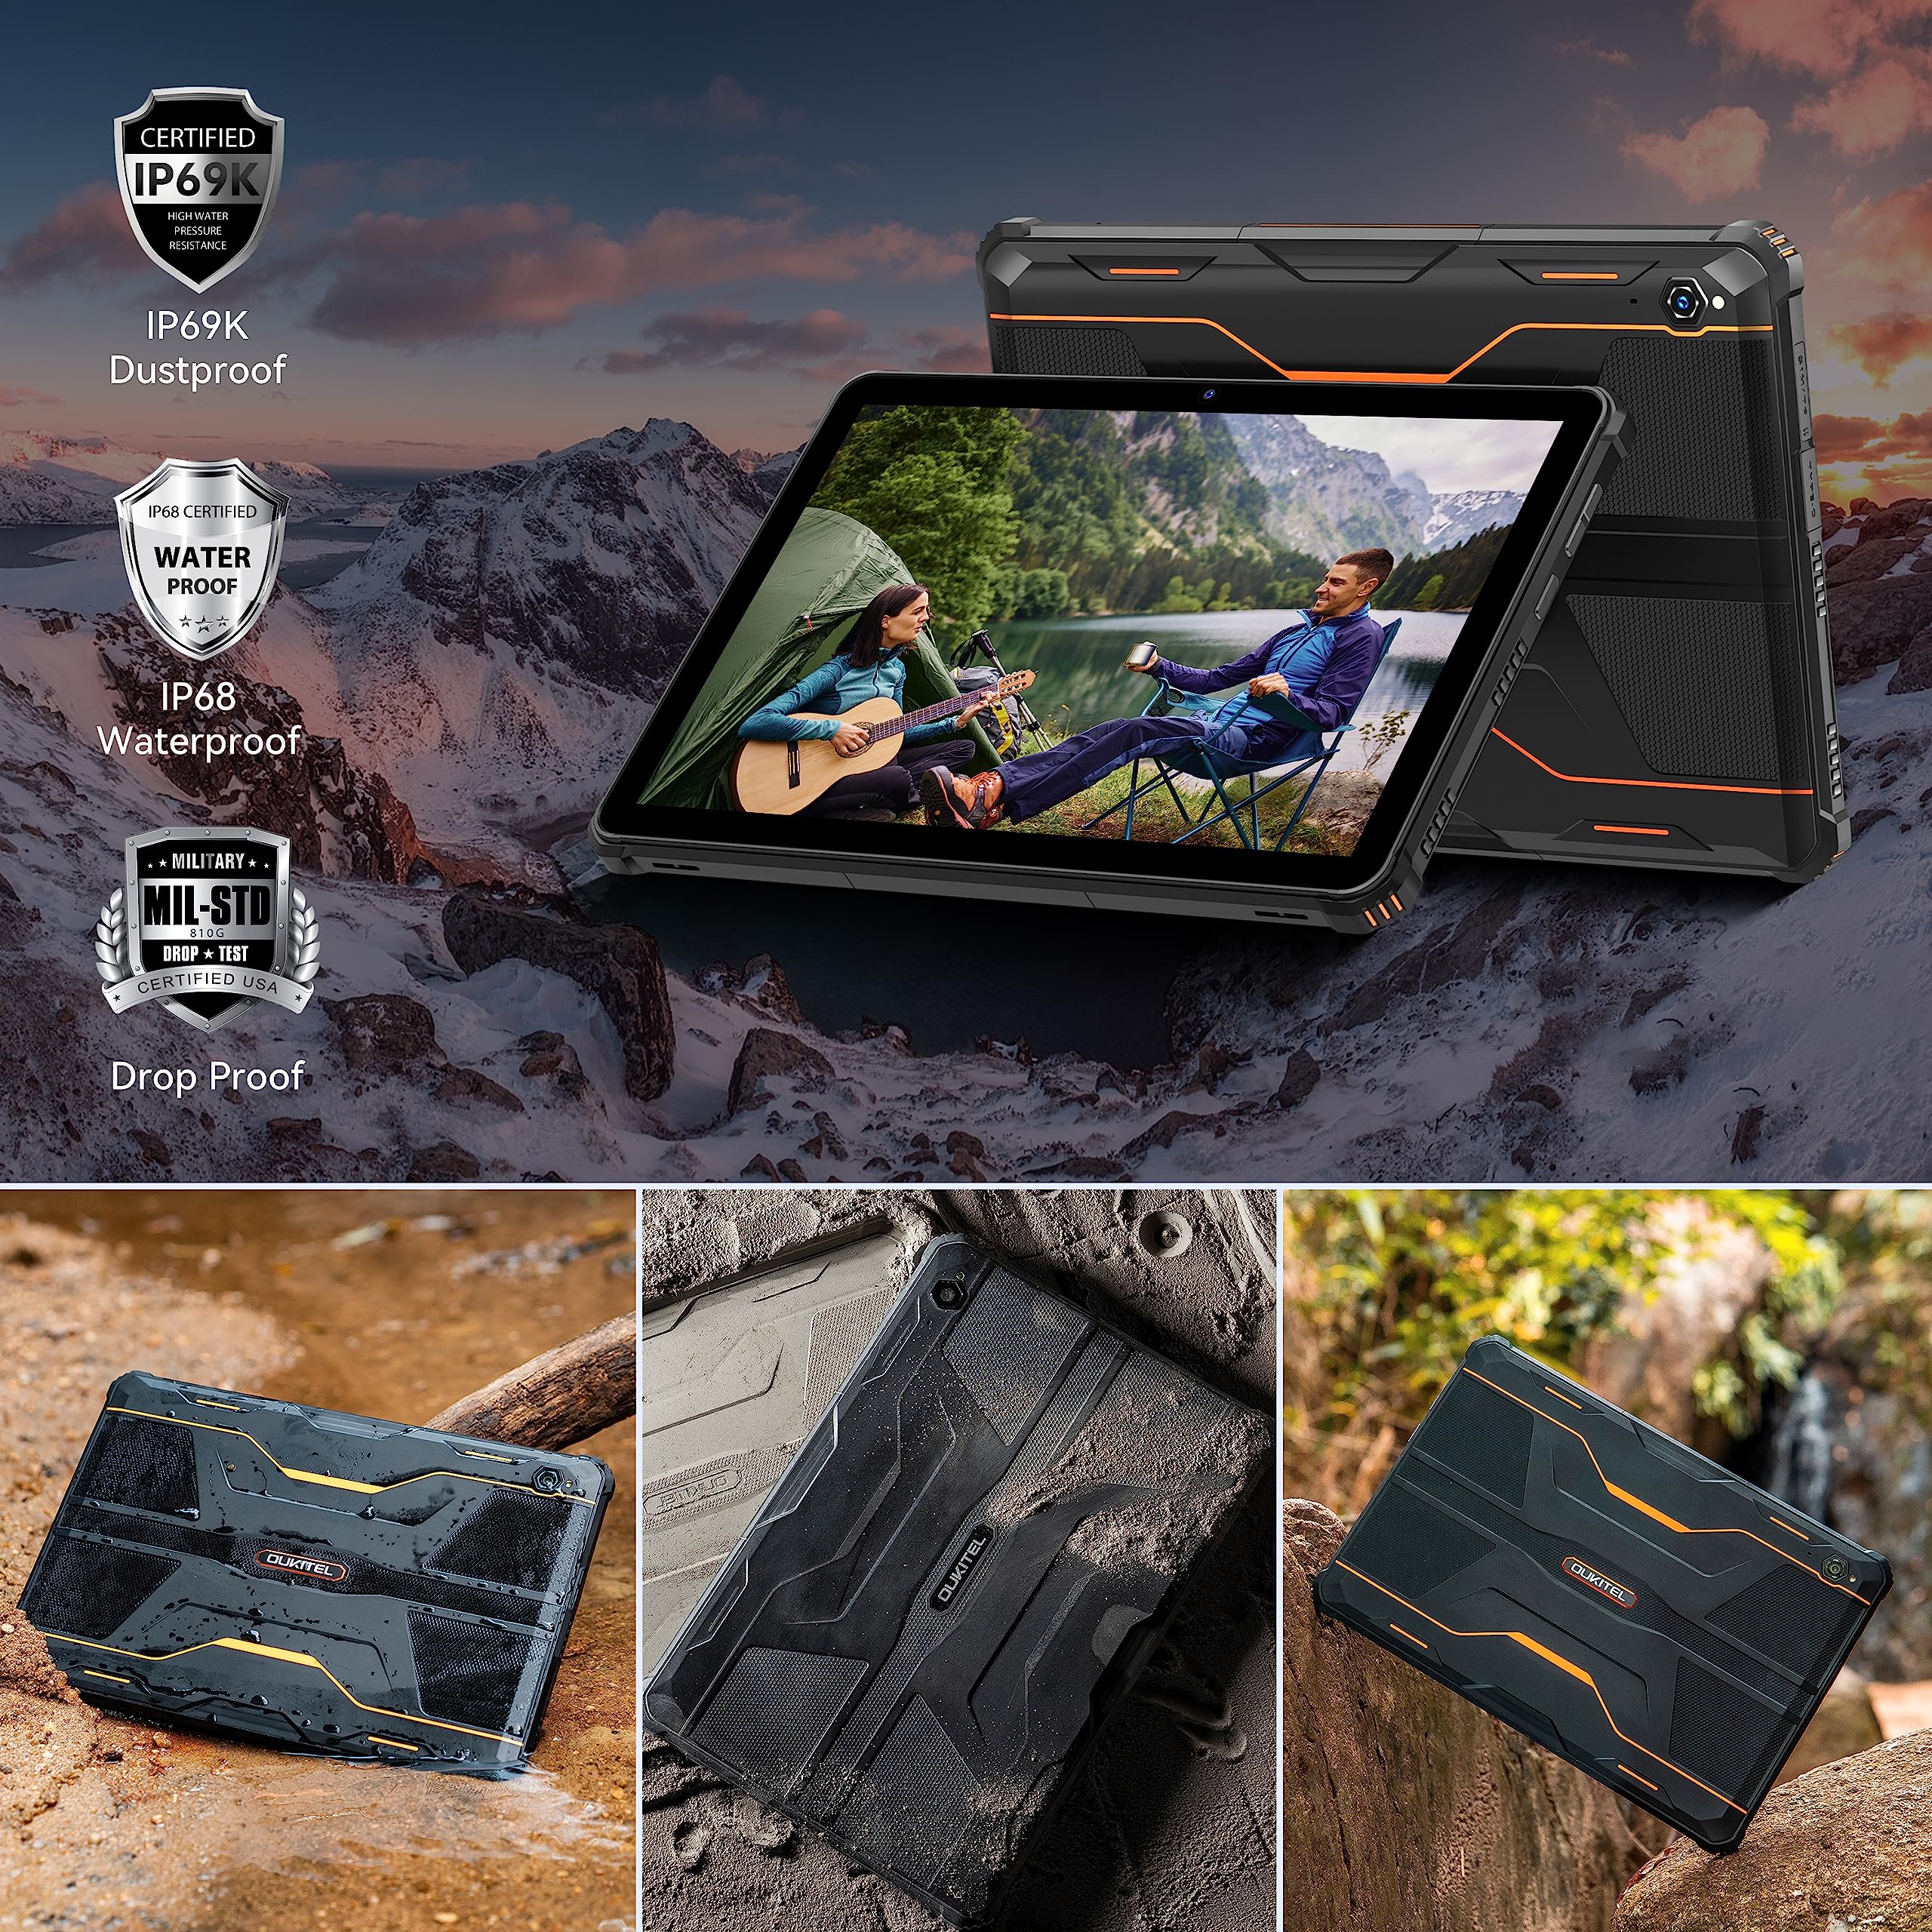 OUKITEL Rugged Tablet Android 13 RT5 11000mAh Waterproof Tablet,14GB+256B Android Tablets 1TB Expandable,Octa-Core 10.1 Inch FHD+, 33W 16MP+16MP Camera 1920x1200 Tablet 4G Dual SIM/5G WiFi/BT5.0/GPS